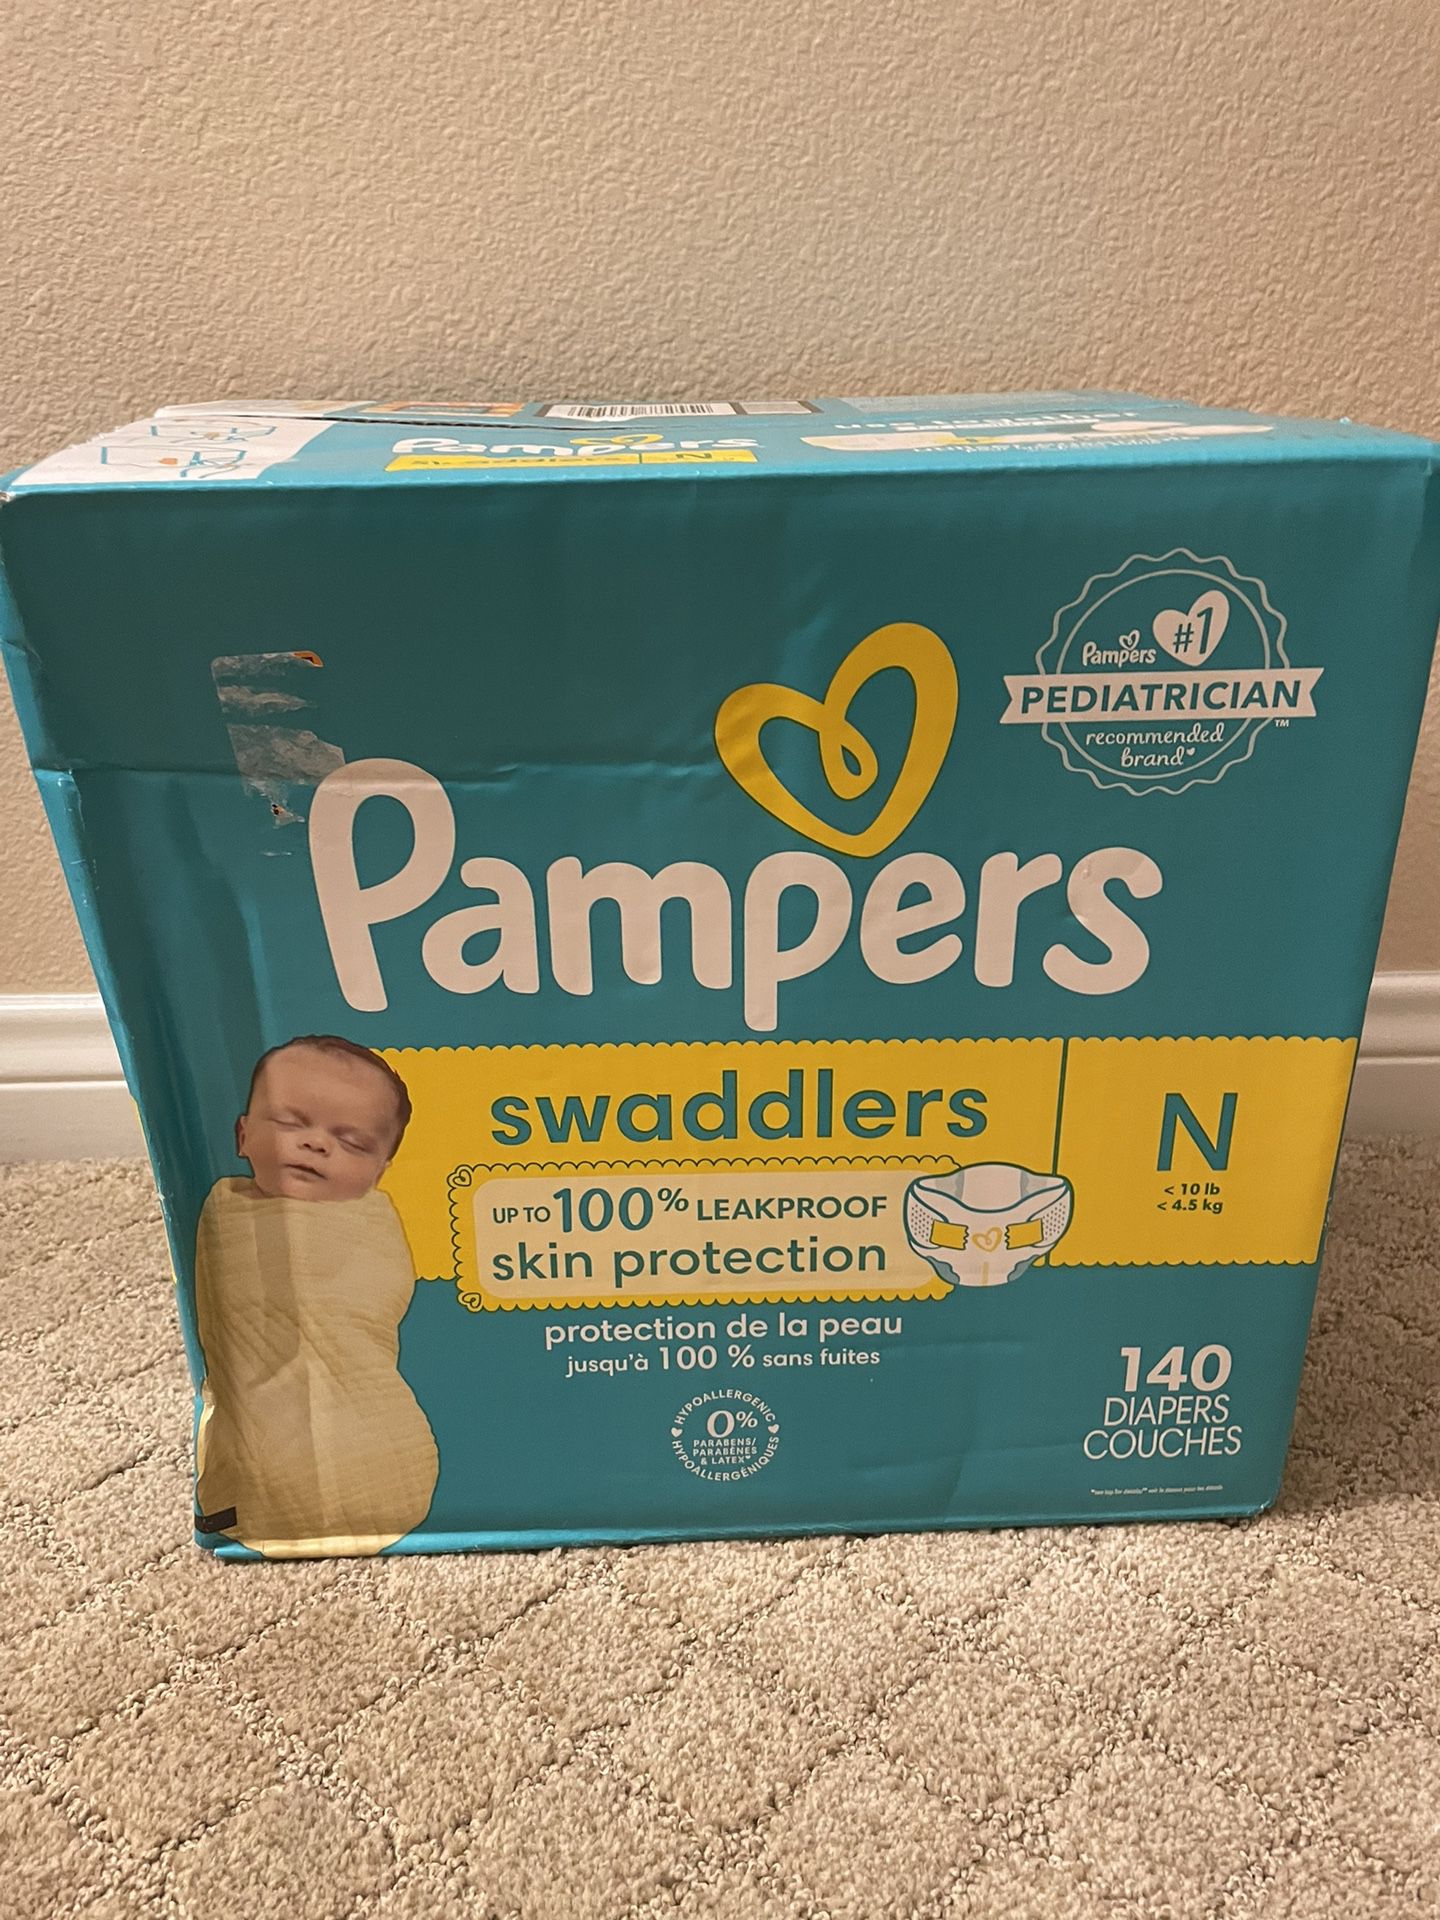 Pampers Swaddlers Newborn Diapers 140 ct